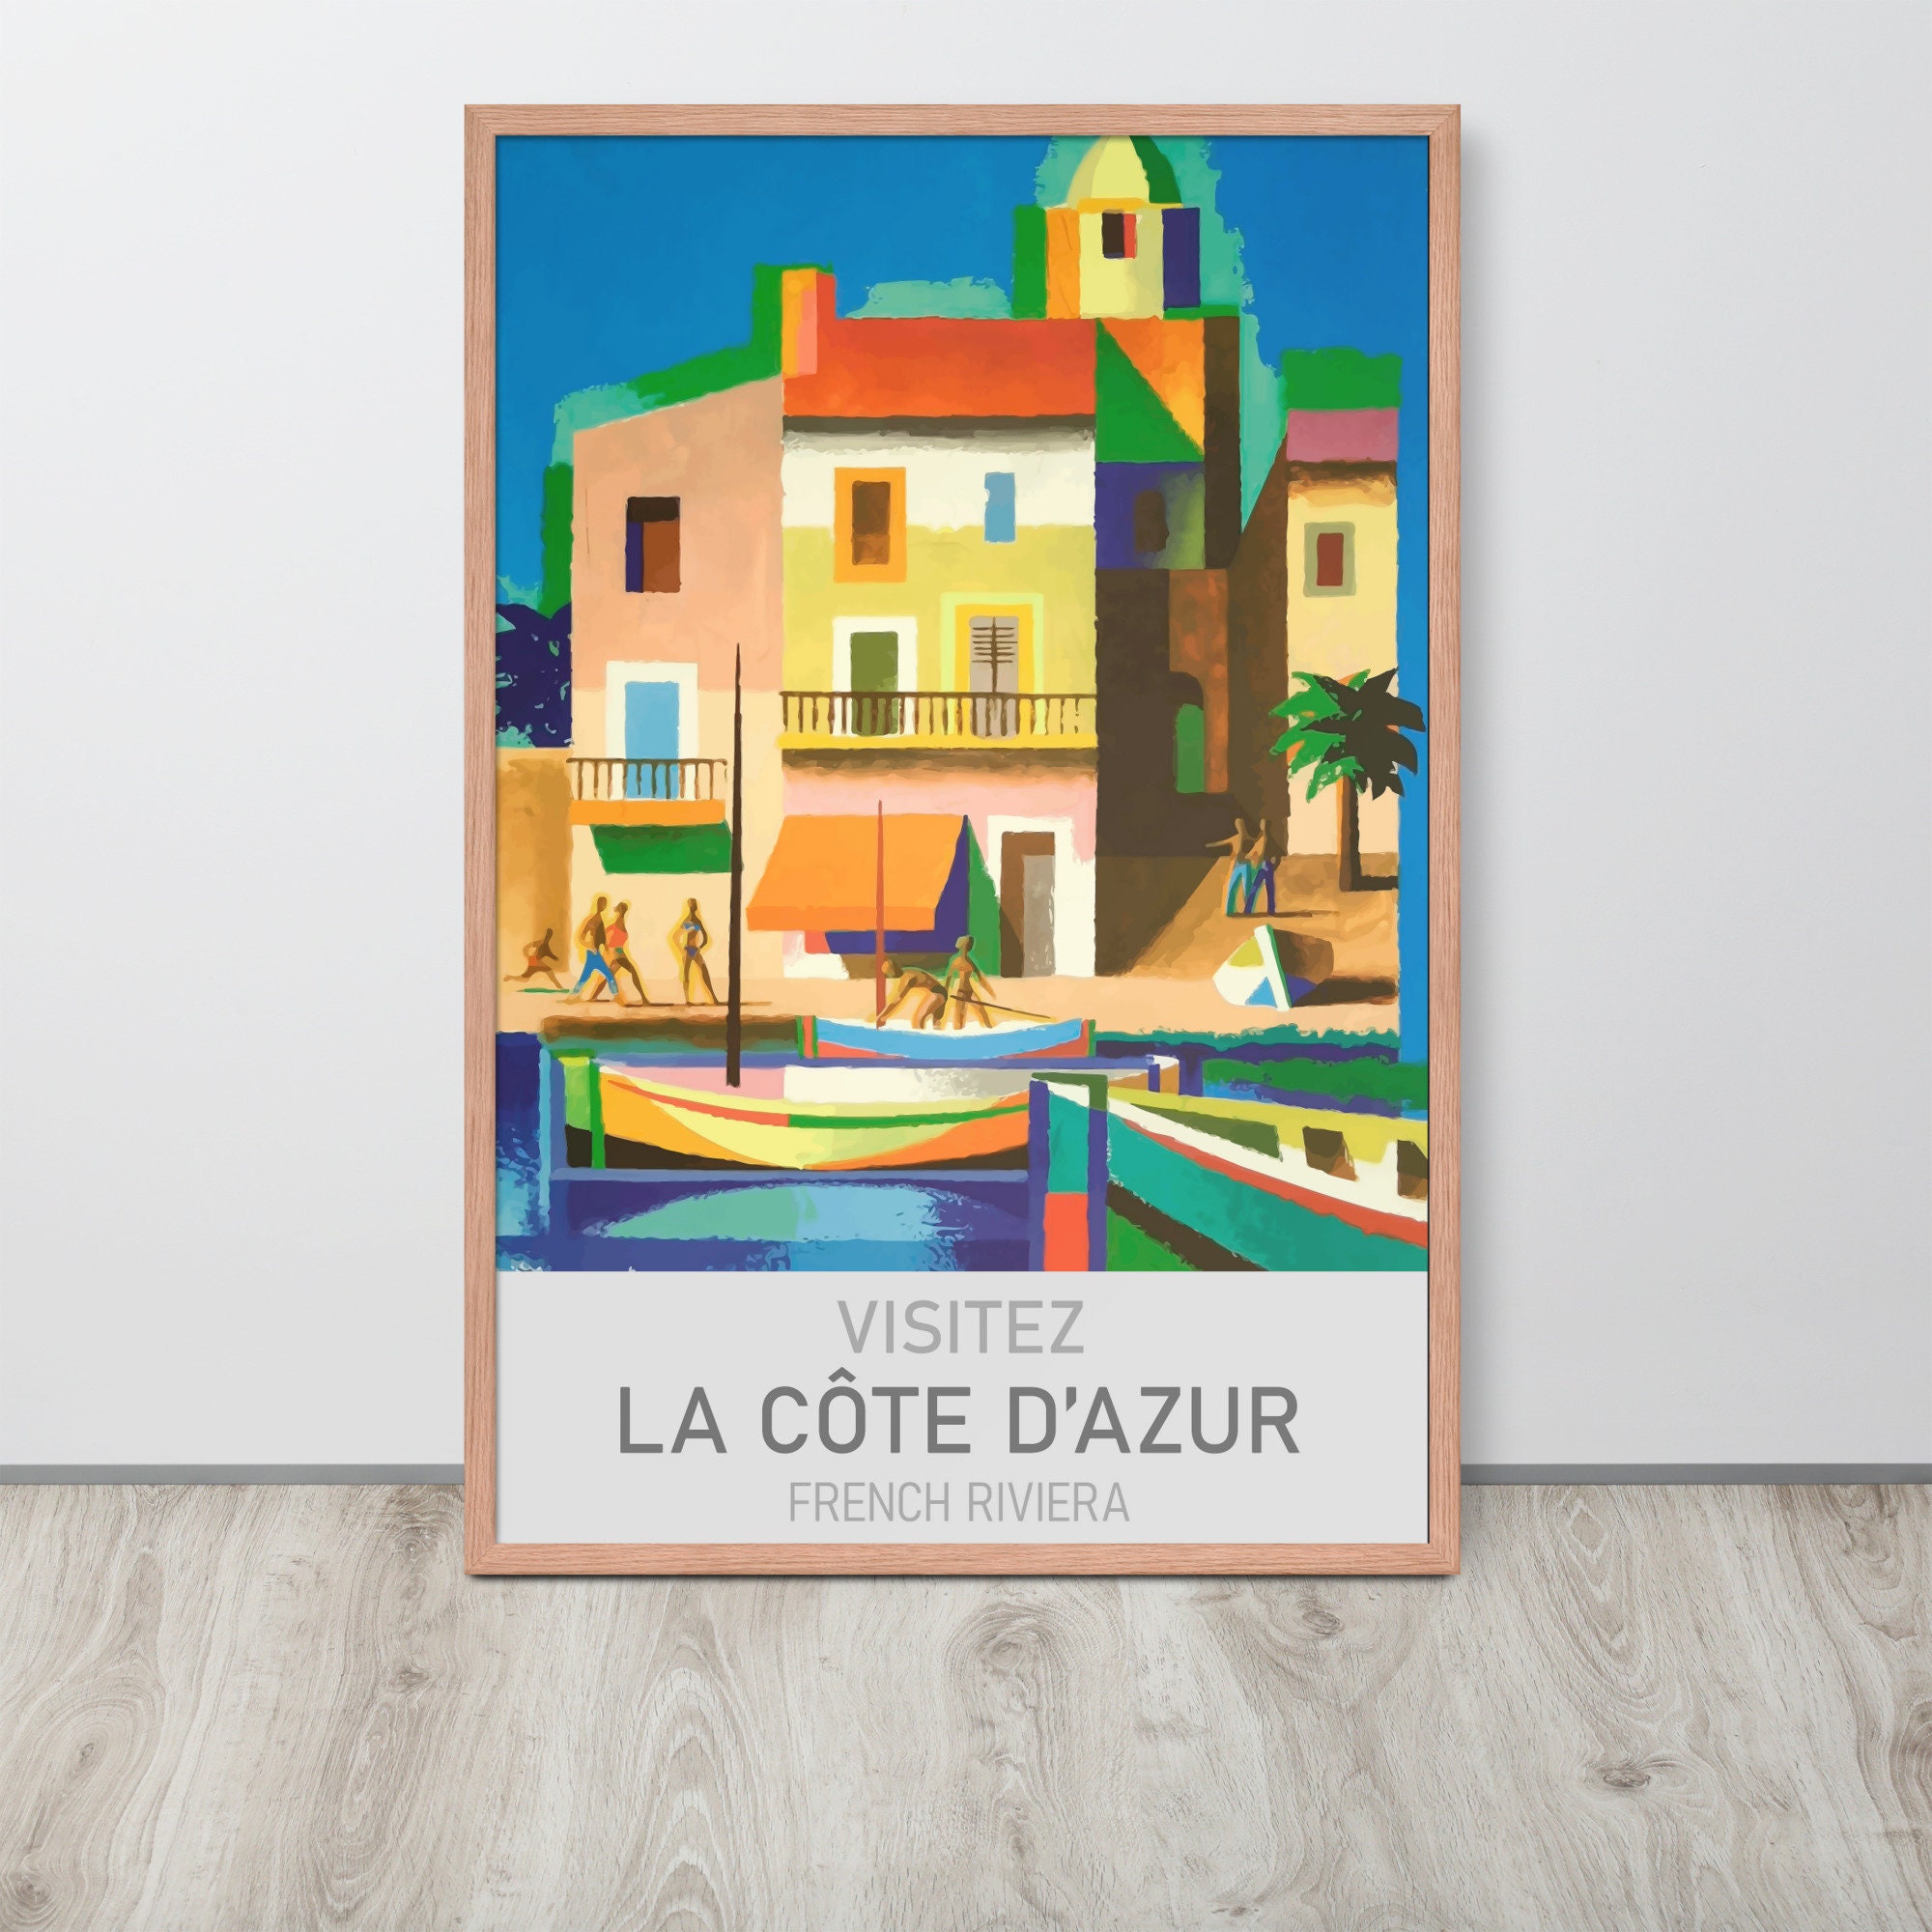 Côte D'azur French Riviera Vintage Travel Advertising - Etsy